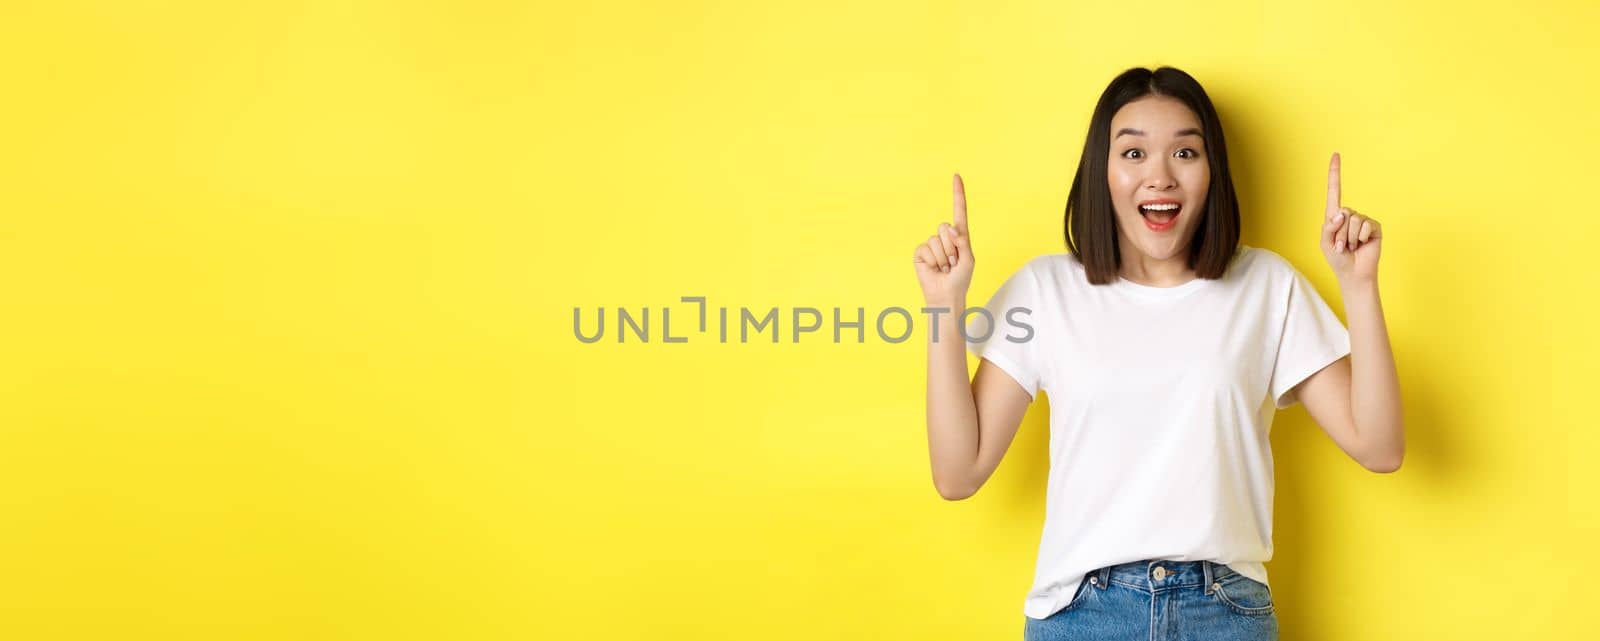 Beauty and fashion concept. Beautiful asian woman in white t-shirt pointing fingers up, standing over yellow background.